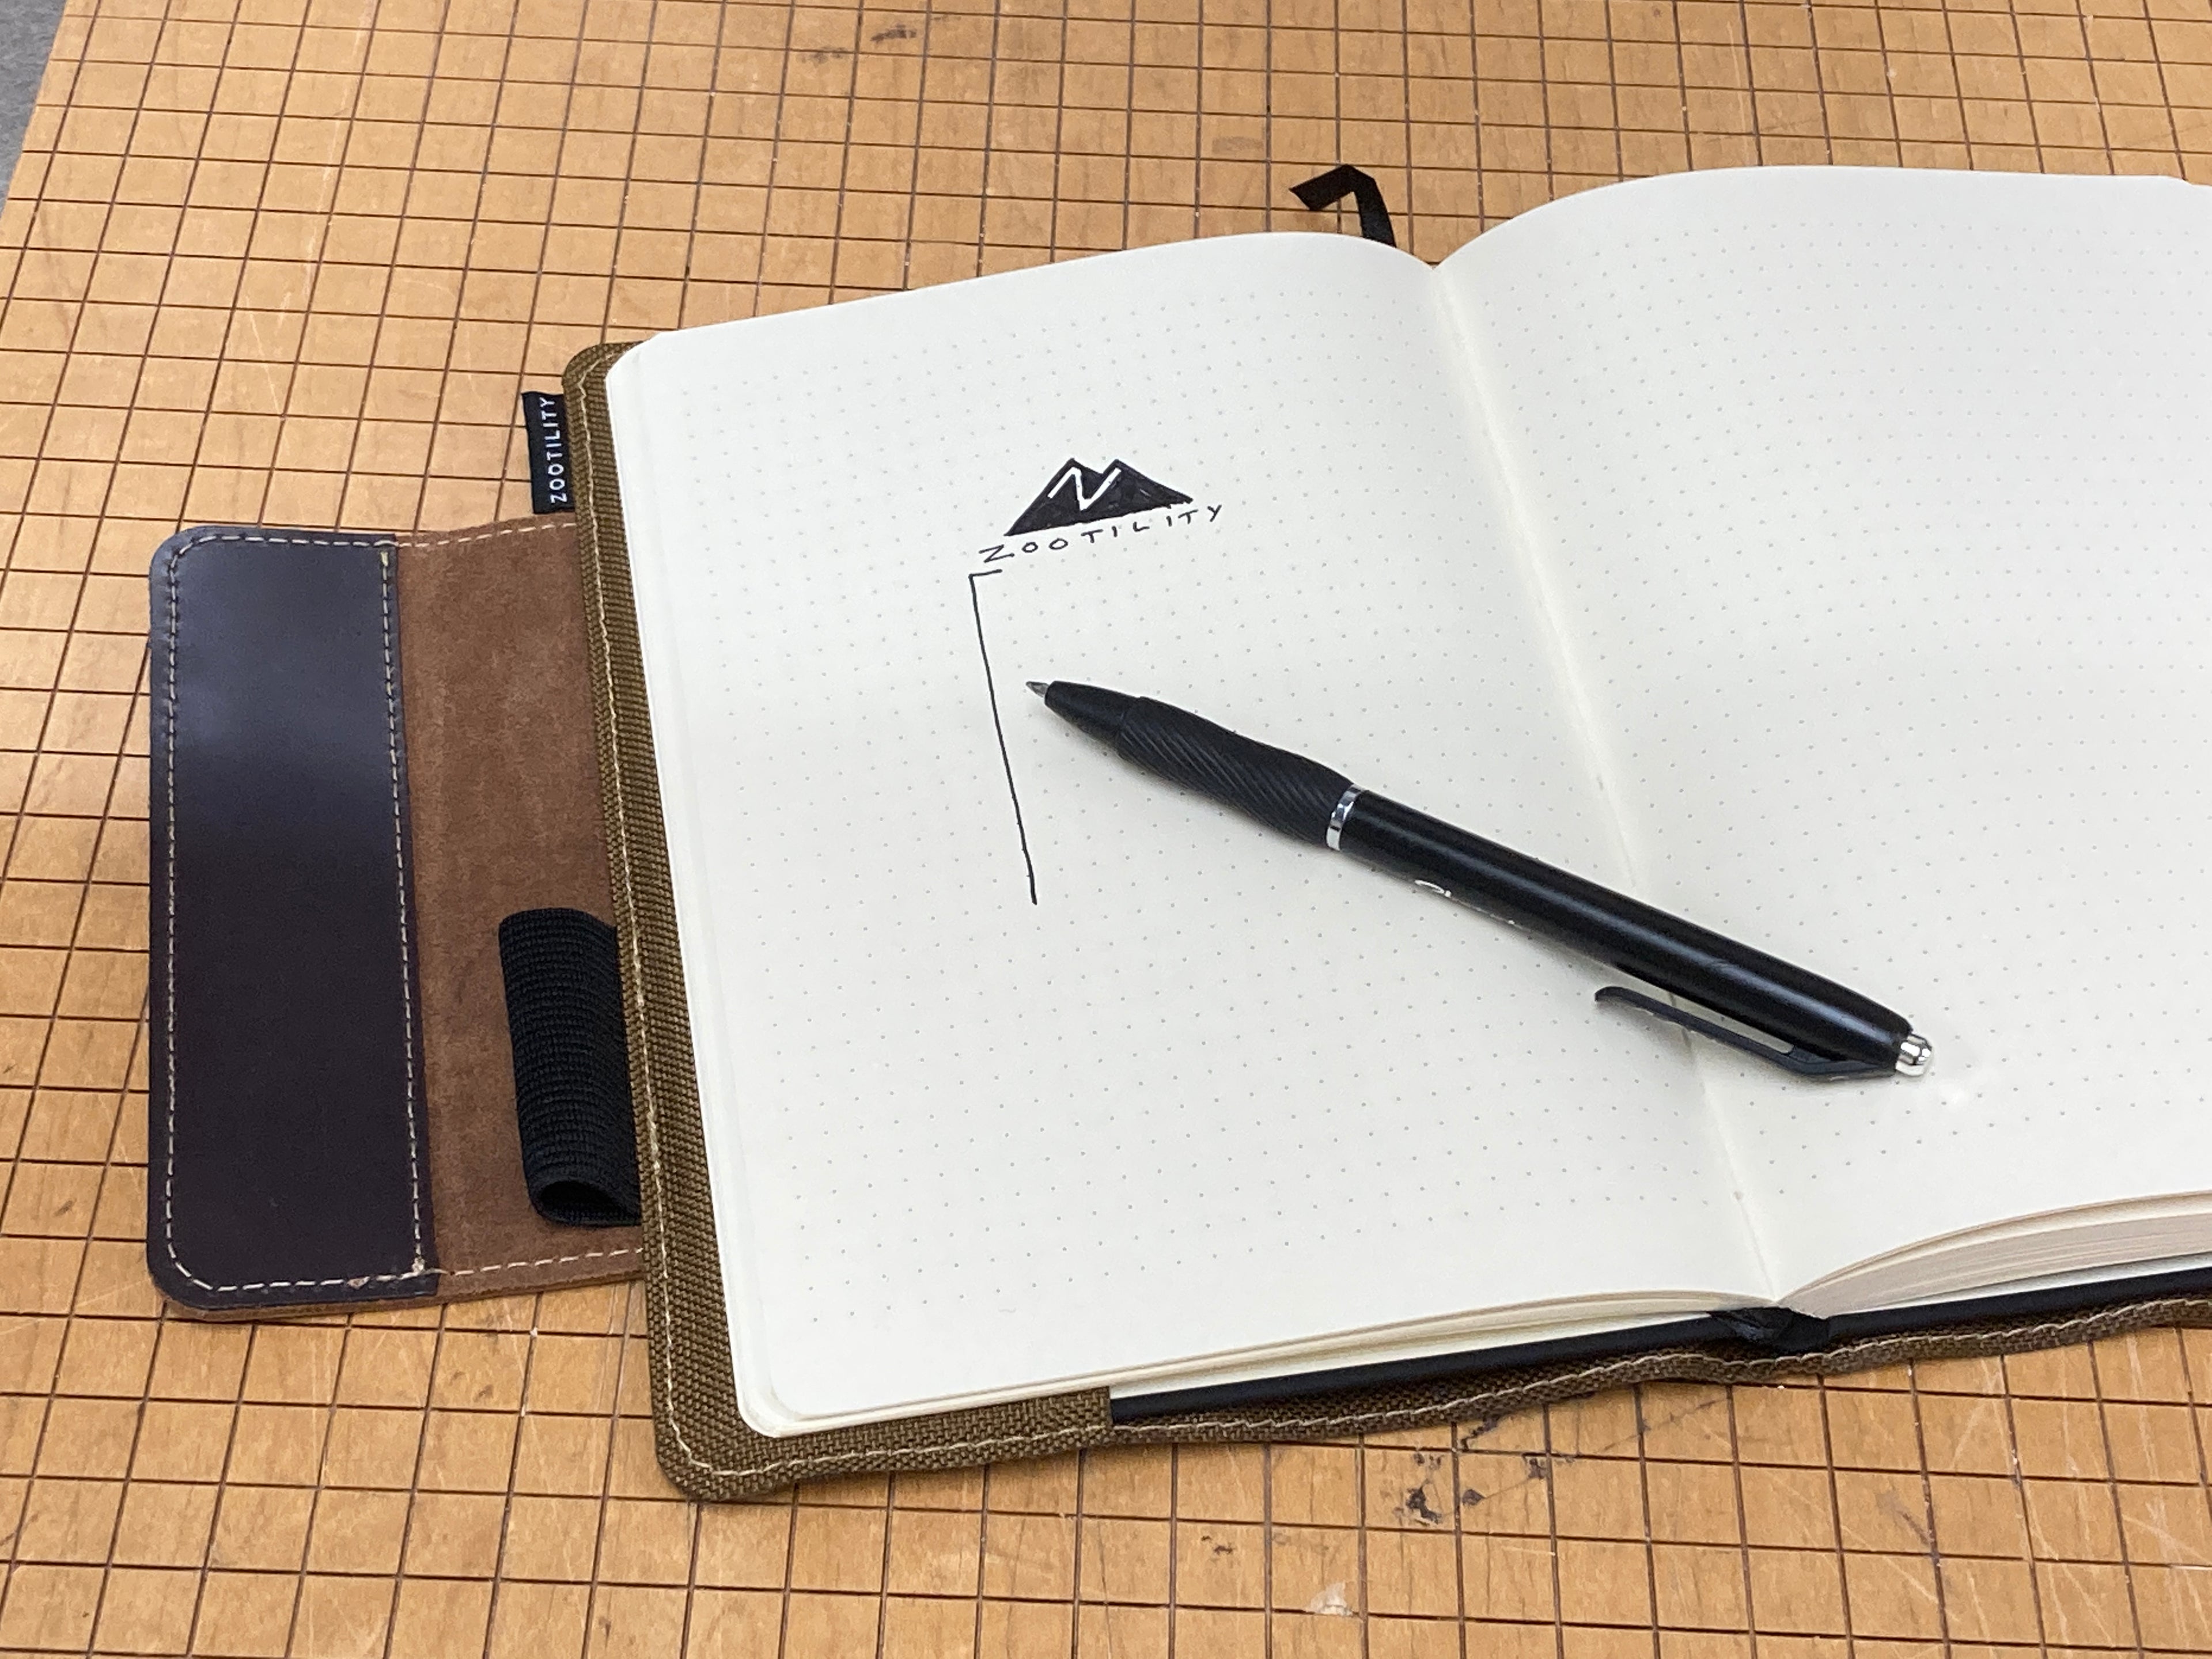 Notebook open with pen.